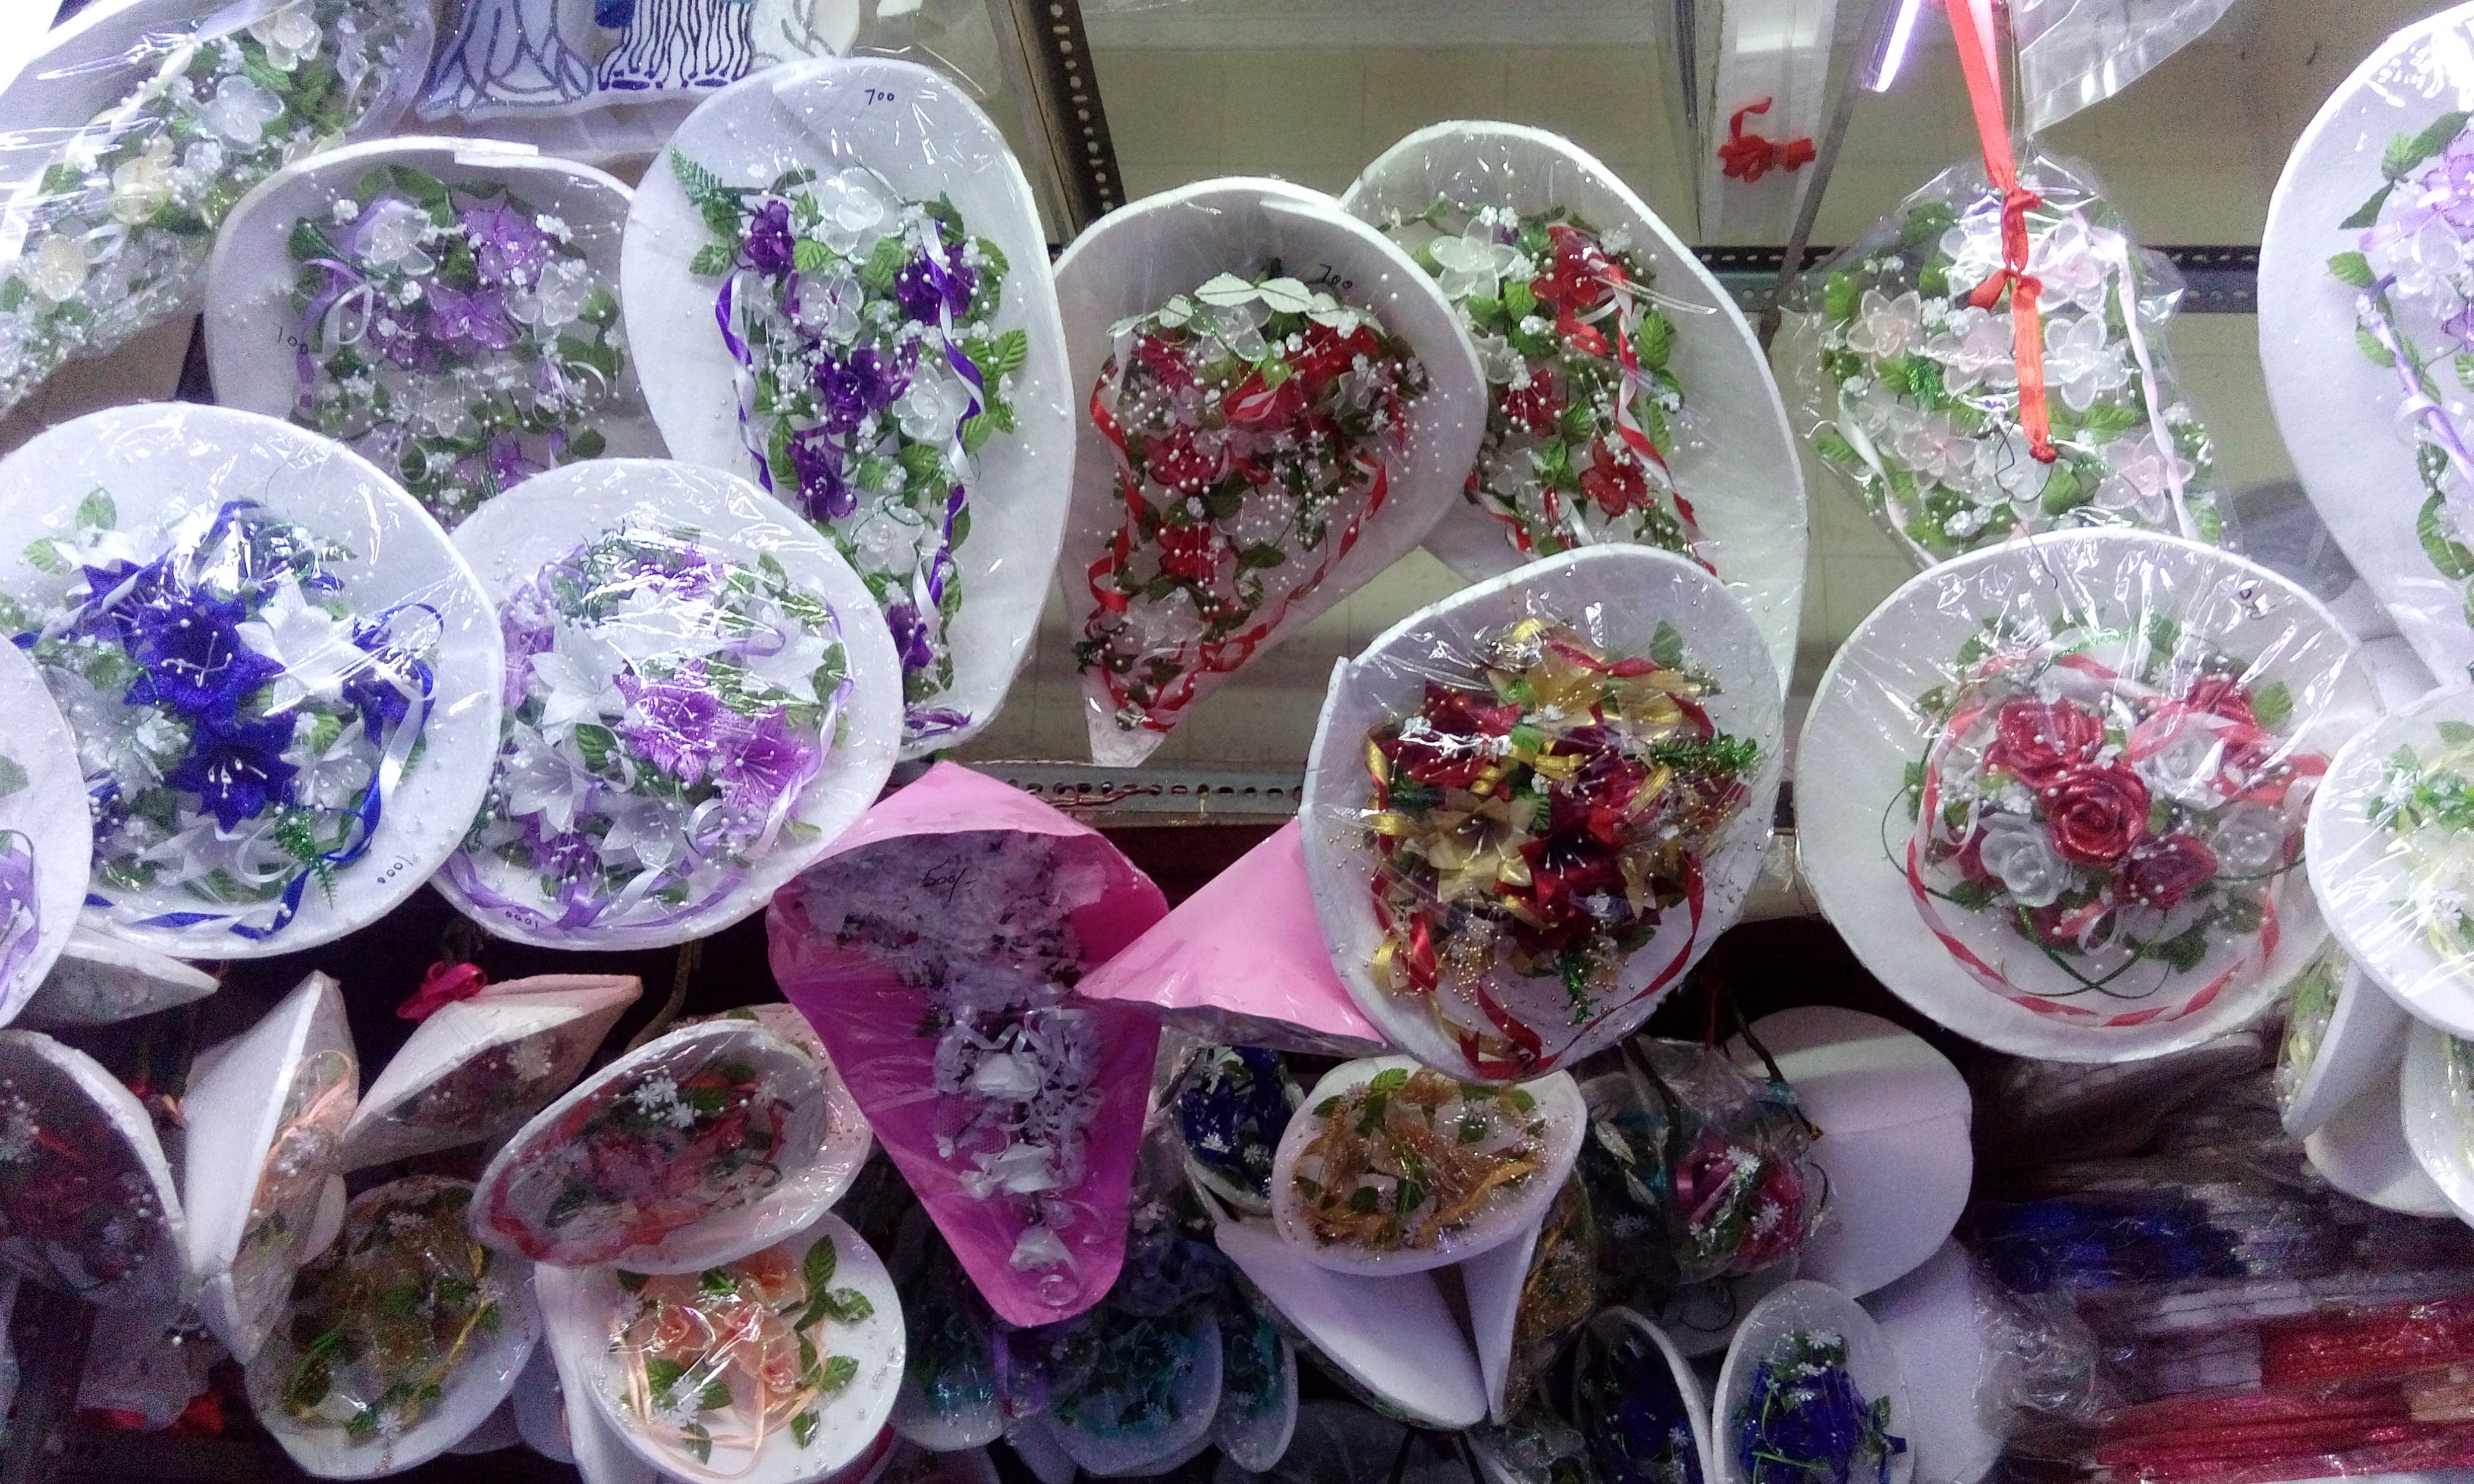 Get Wedding Accessories For Cheap At This Tiny Boutique In Bandra